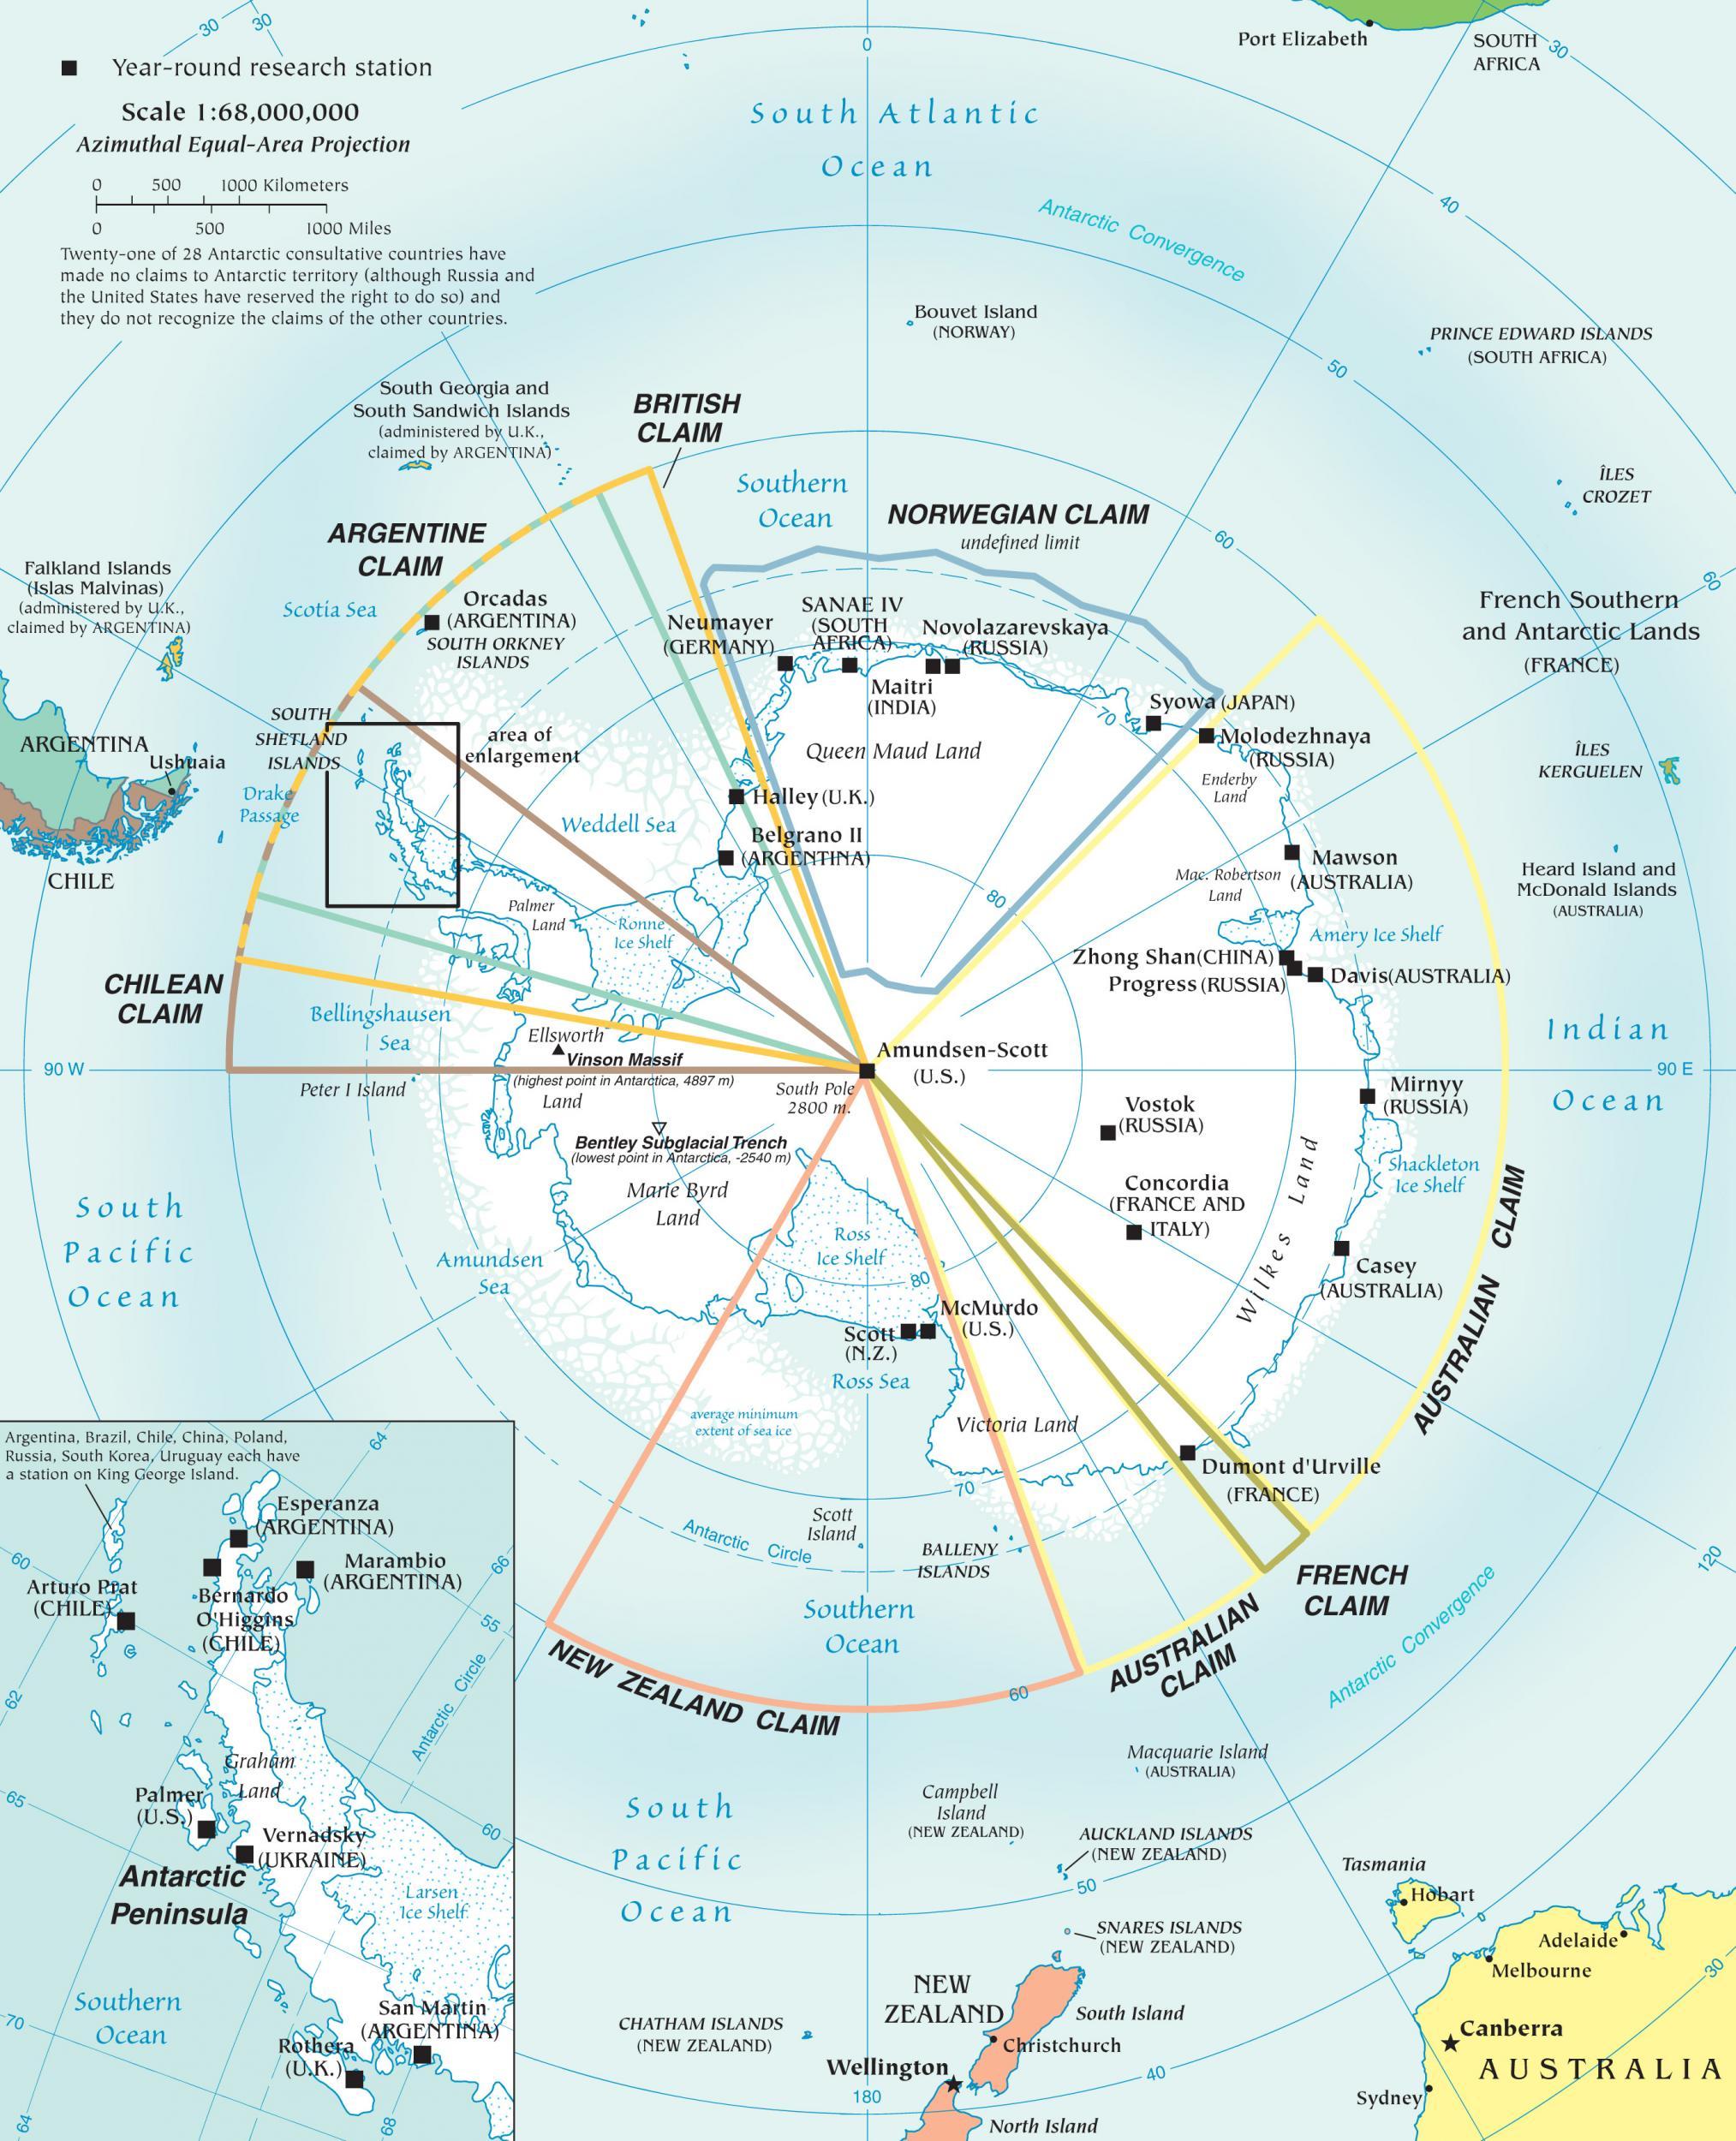 A map of the Antarctic region claims (CIA)